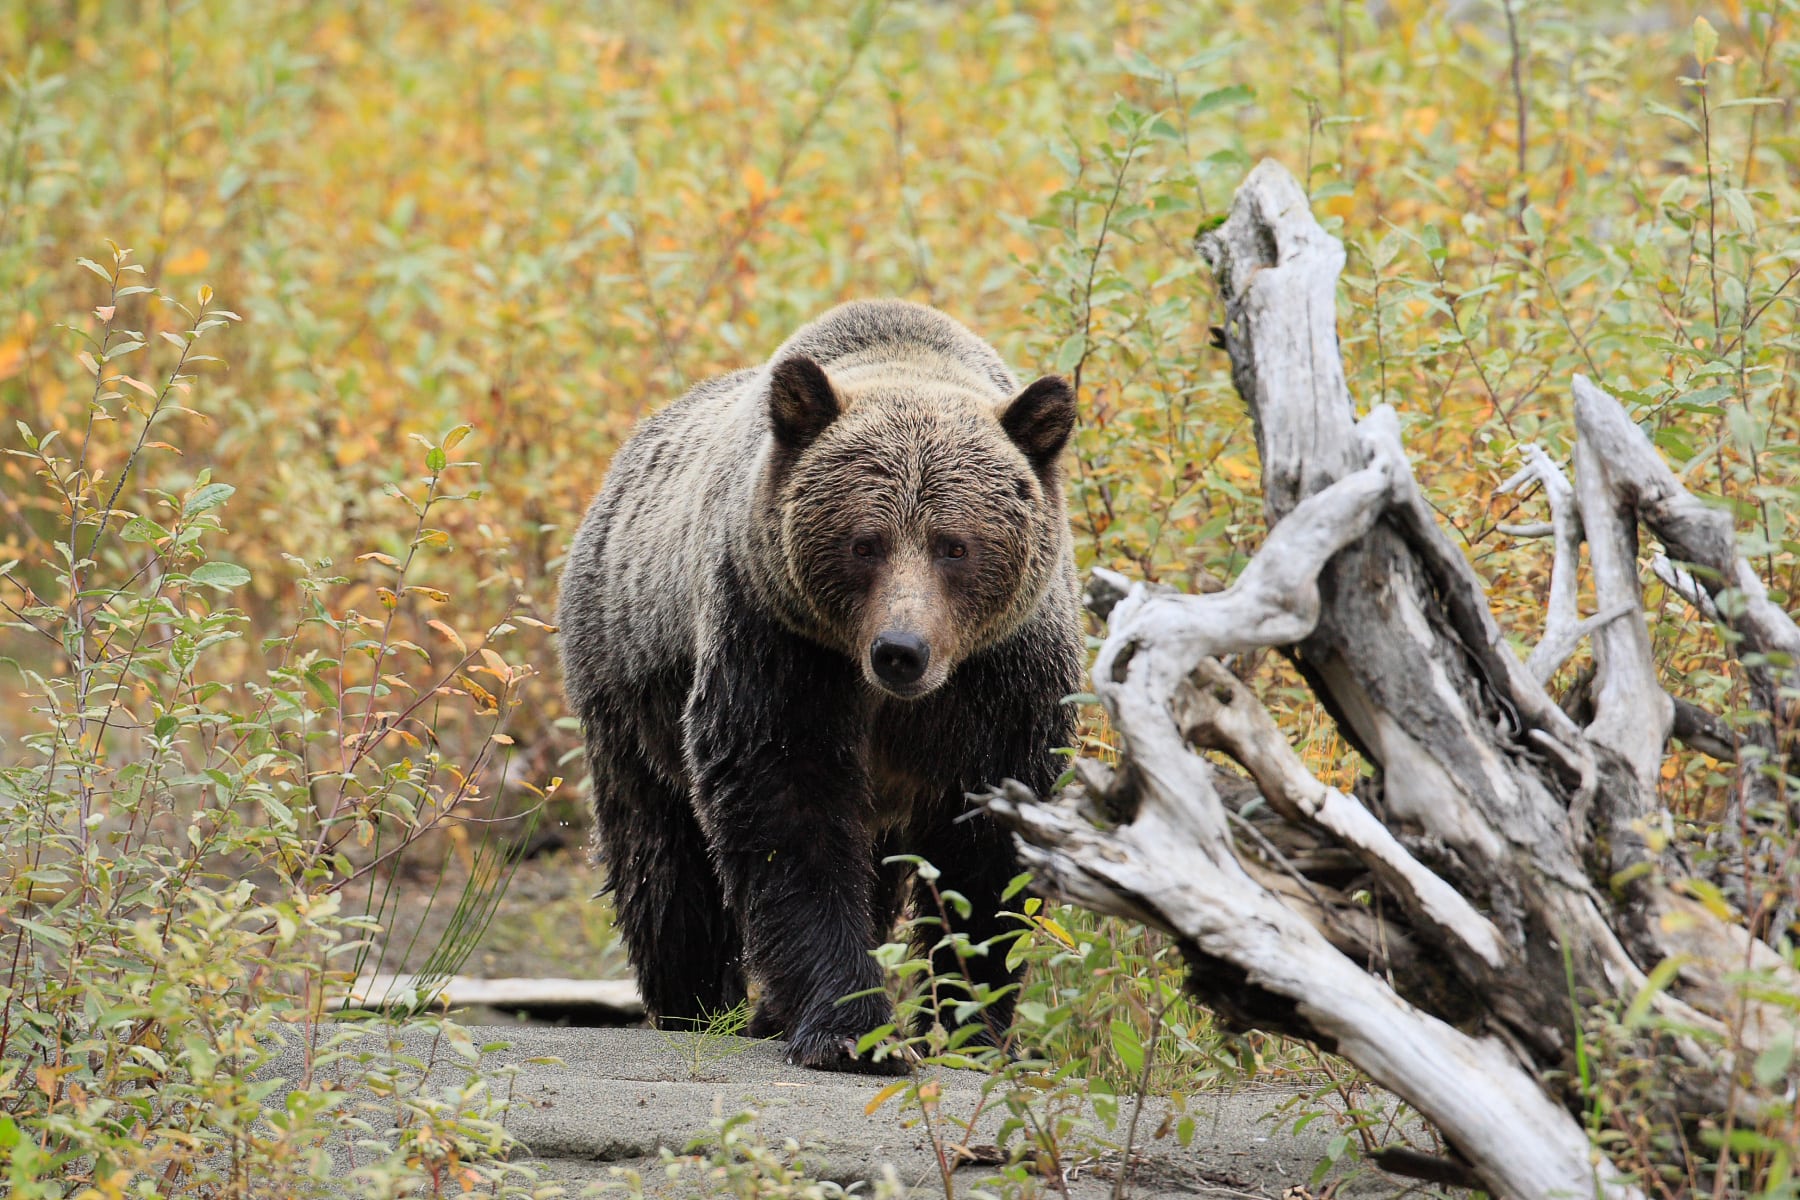 Grizzly-viewing at Wild Bear Lodge